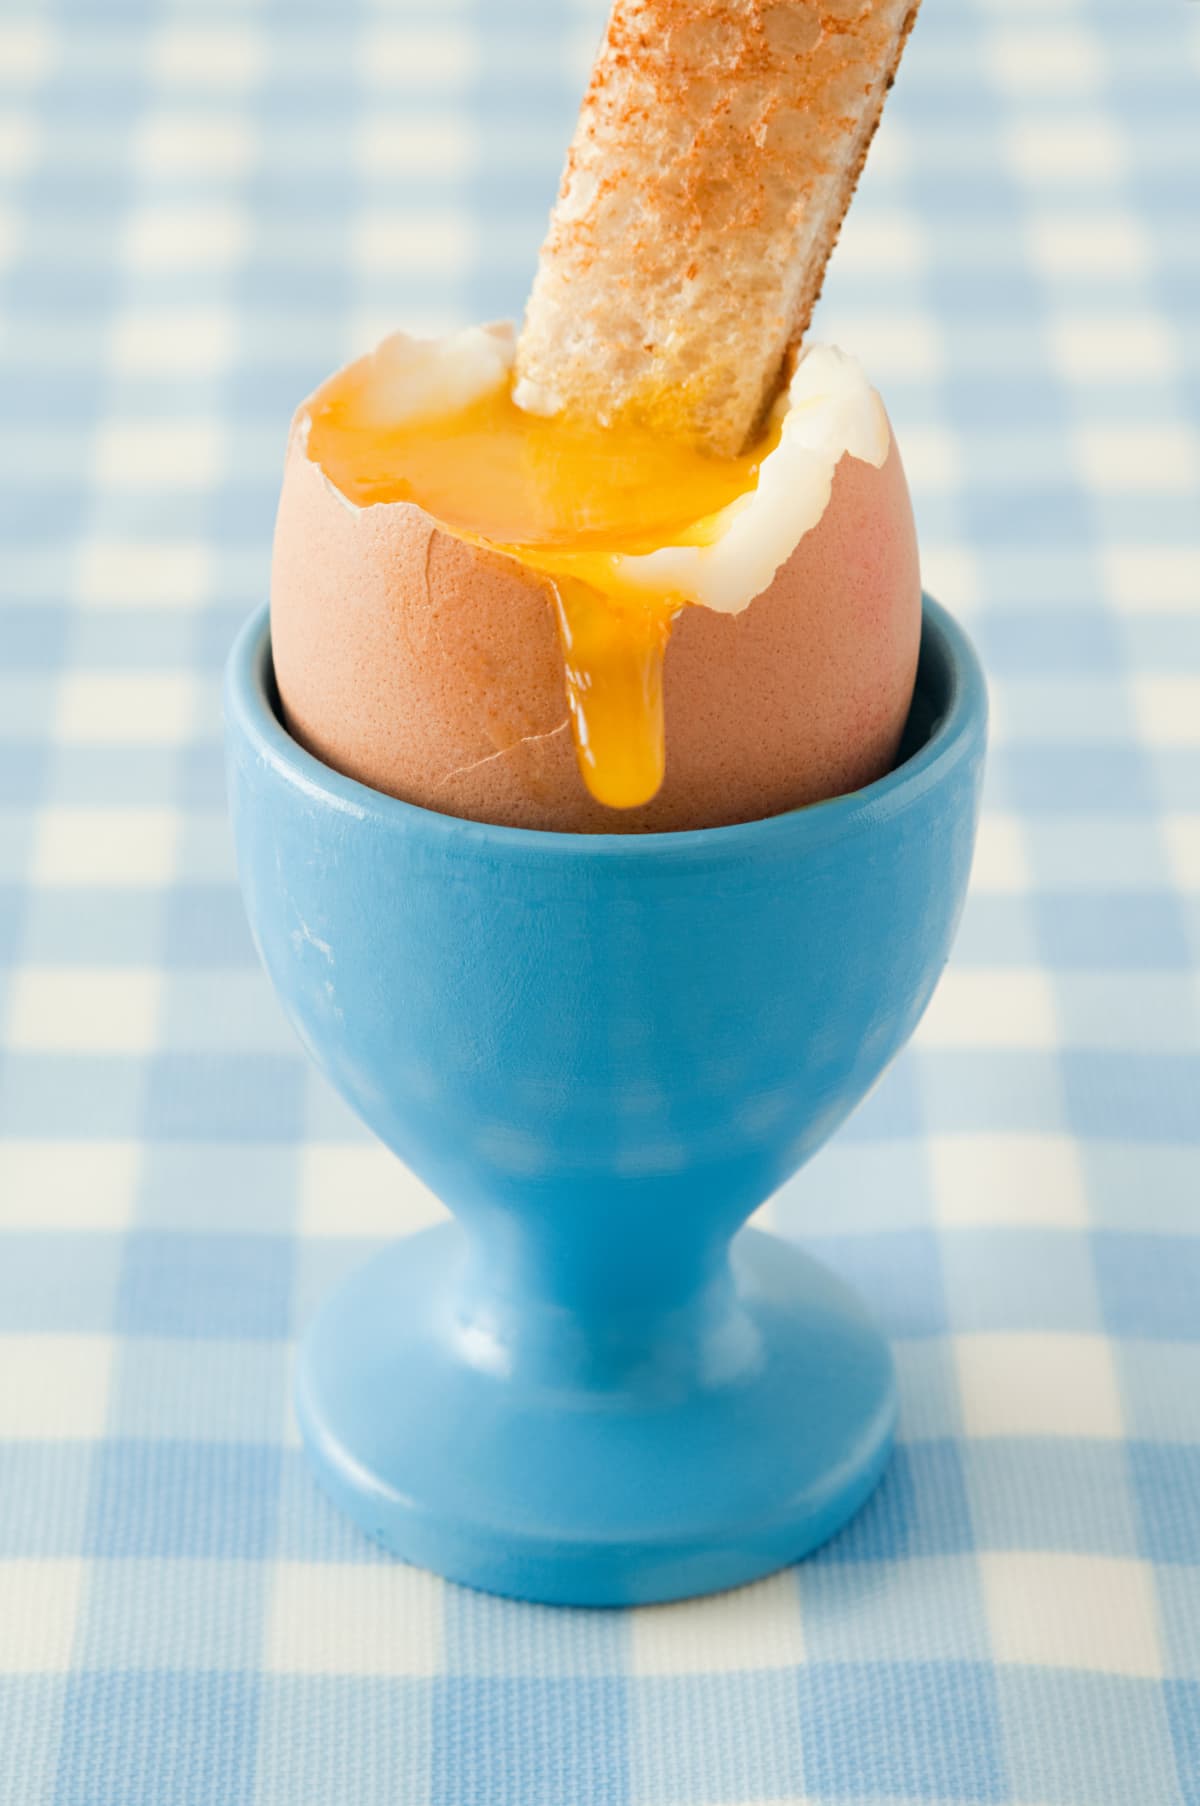 Soft-boiled egg in an egg cup on tablecloth